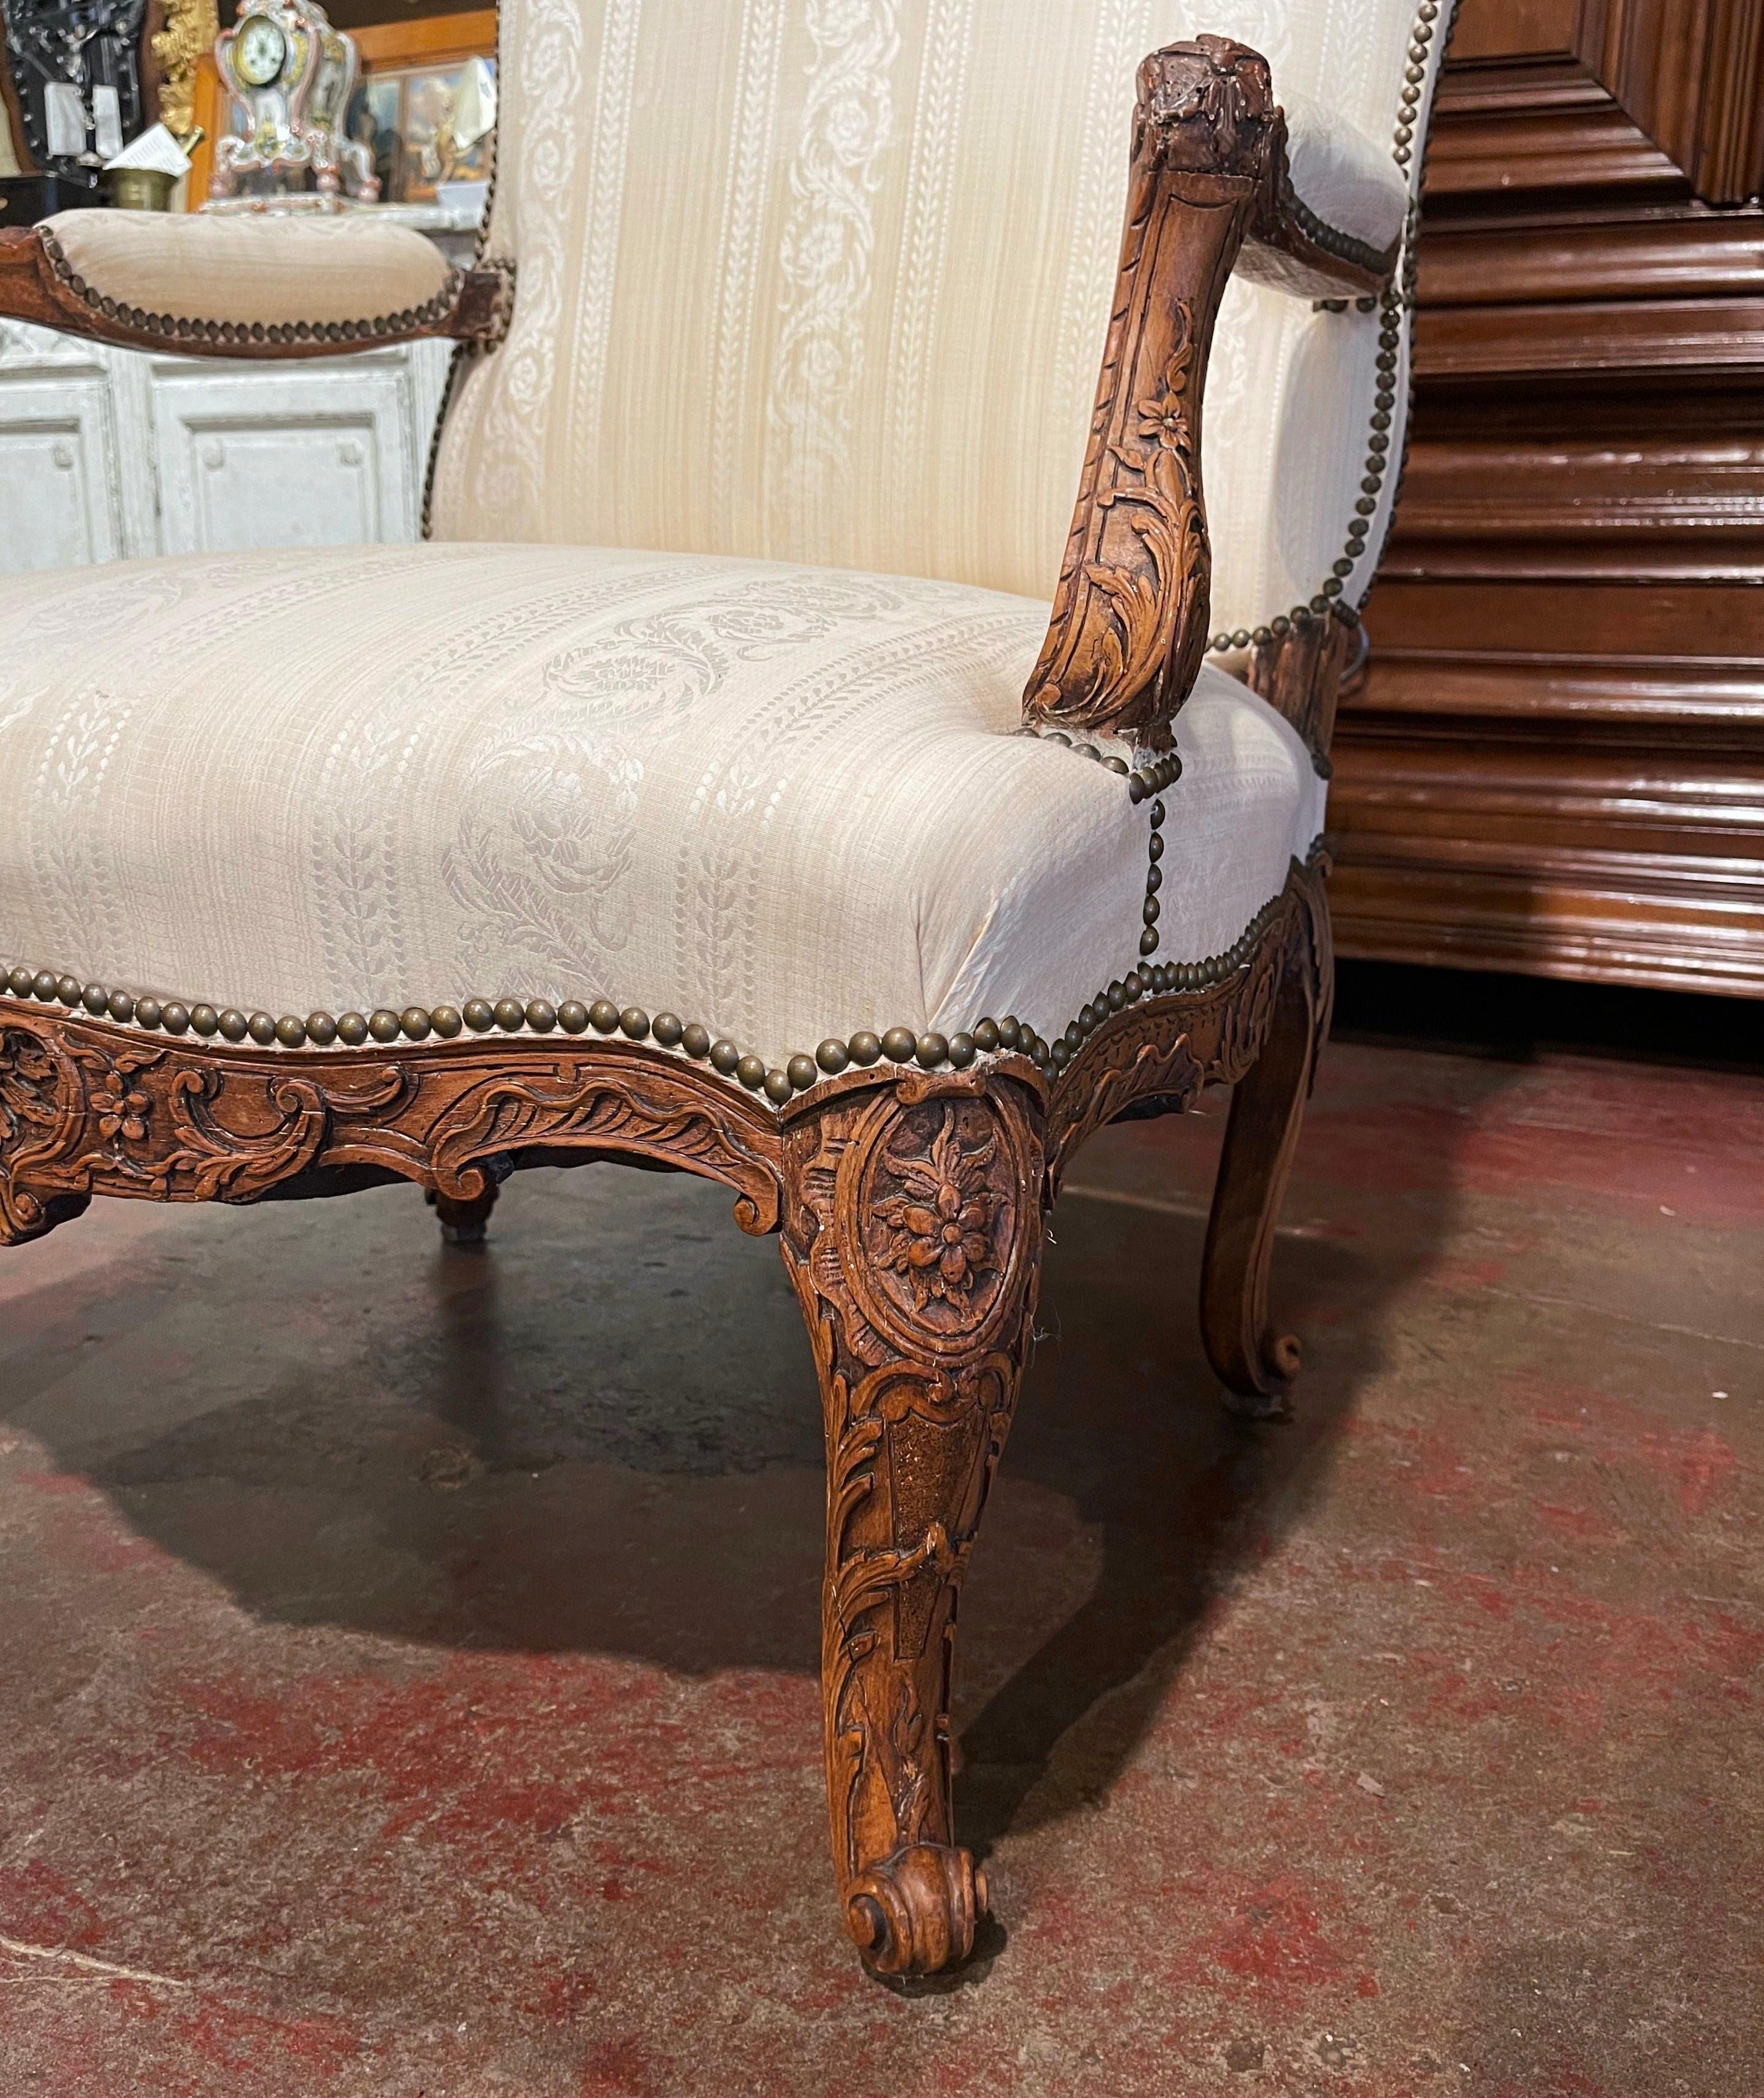 Decorate a study or a bedroom with this elegant antique armchair. Crafted in southern France circa 1860, the comfortable fauteuil sits on cabriole legs decorated with acanthus leaves at the shoulder and ending with escargot feet. The armchair has a